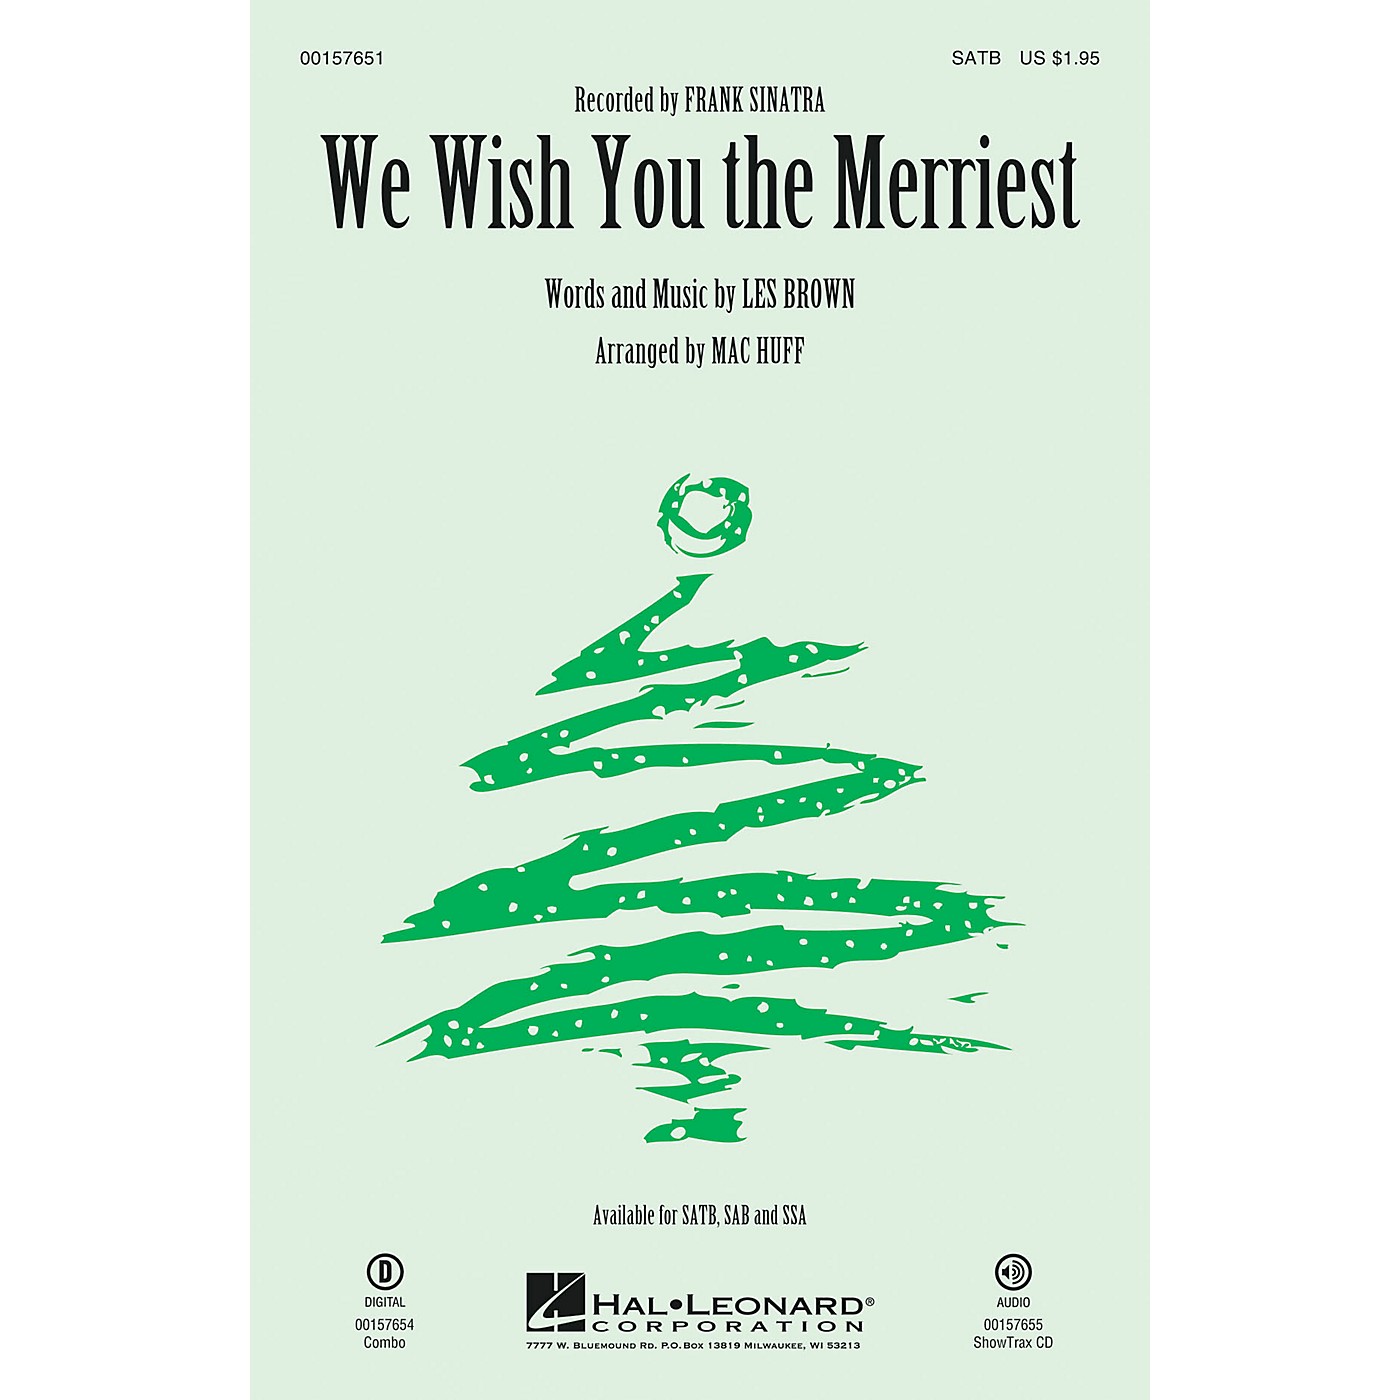 Hal Leonard We Wish You the Merriest SATB by Frank Sinatra arranged by Mac Huff thumbnail